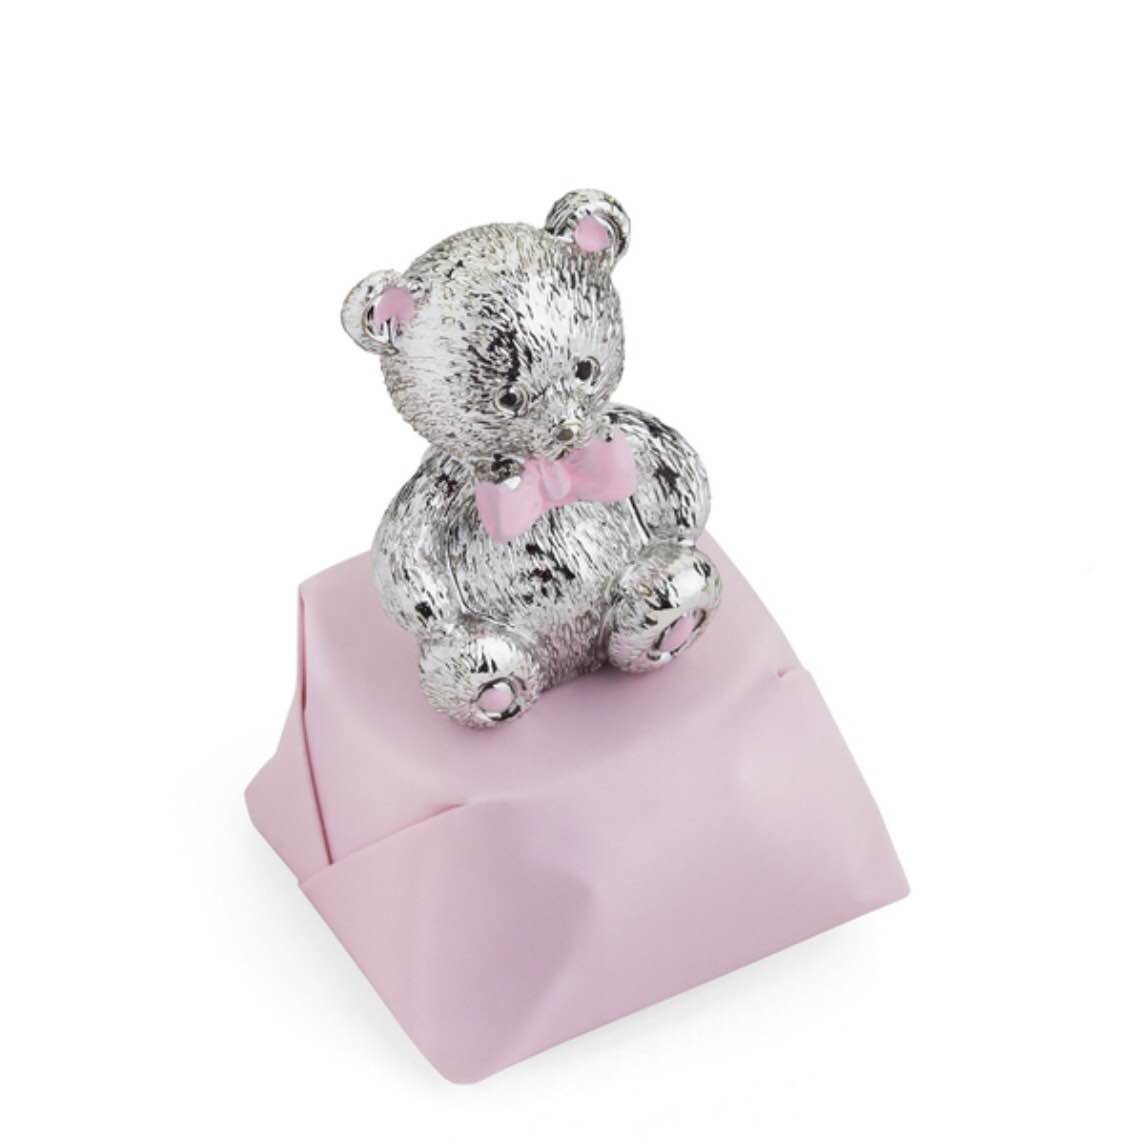 “BEARY” CUTE PINK DECORATED CHOCOLATE